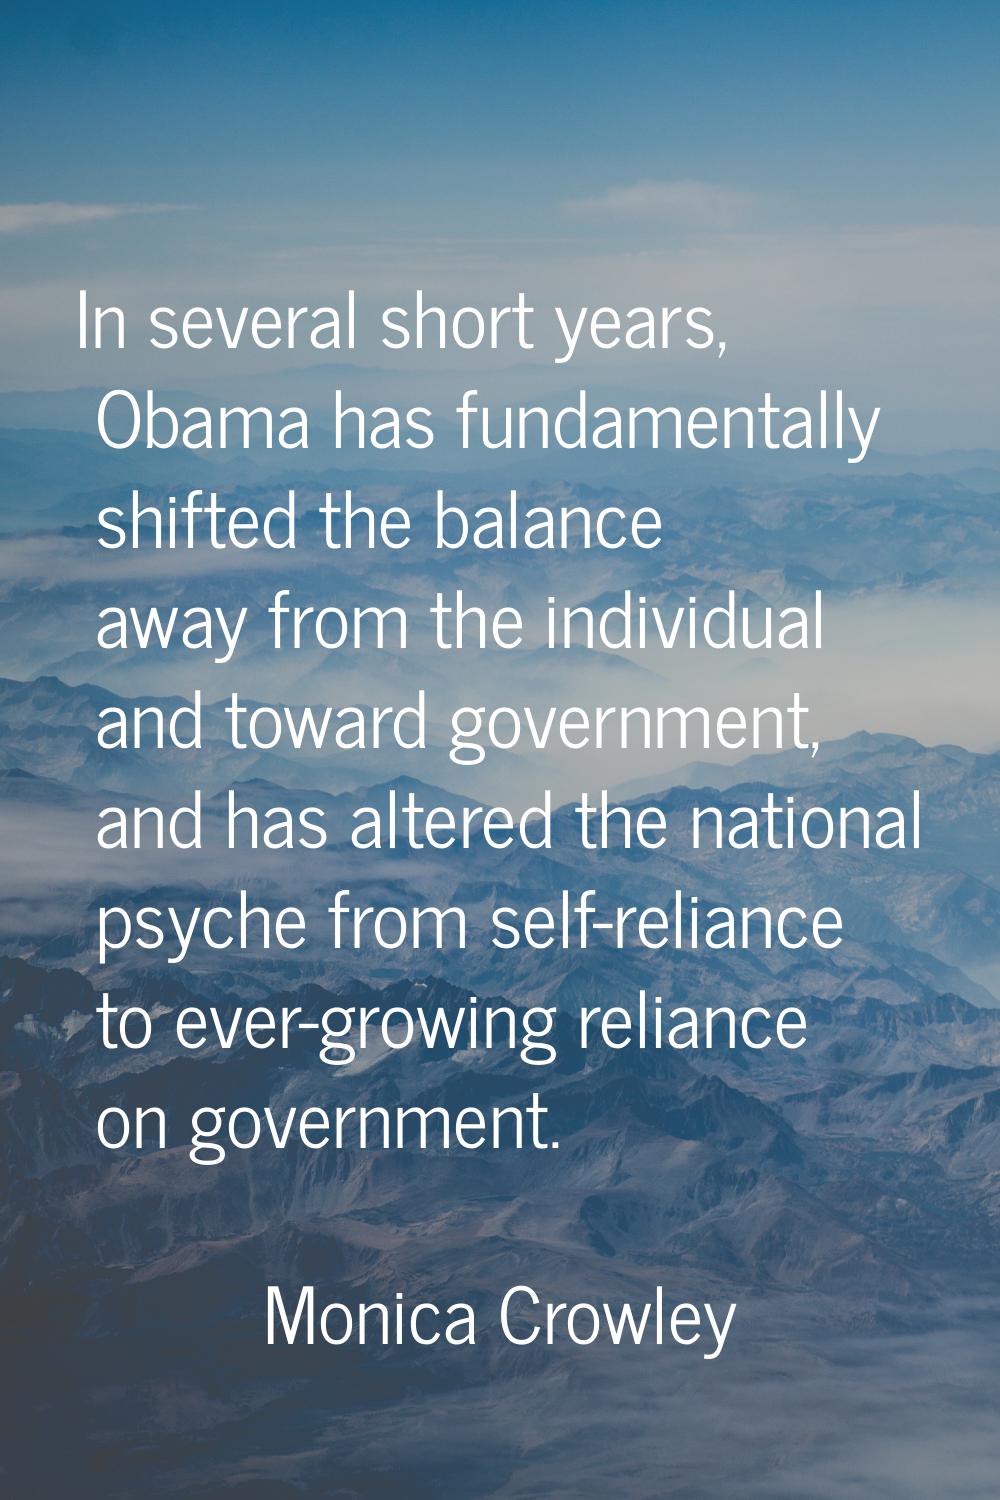 In several short years, Obama has fundamentally shifted the balance away from the individual and to